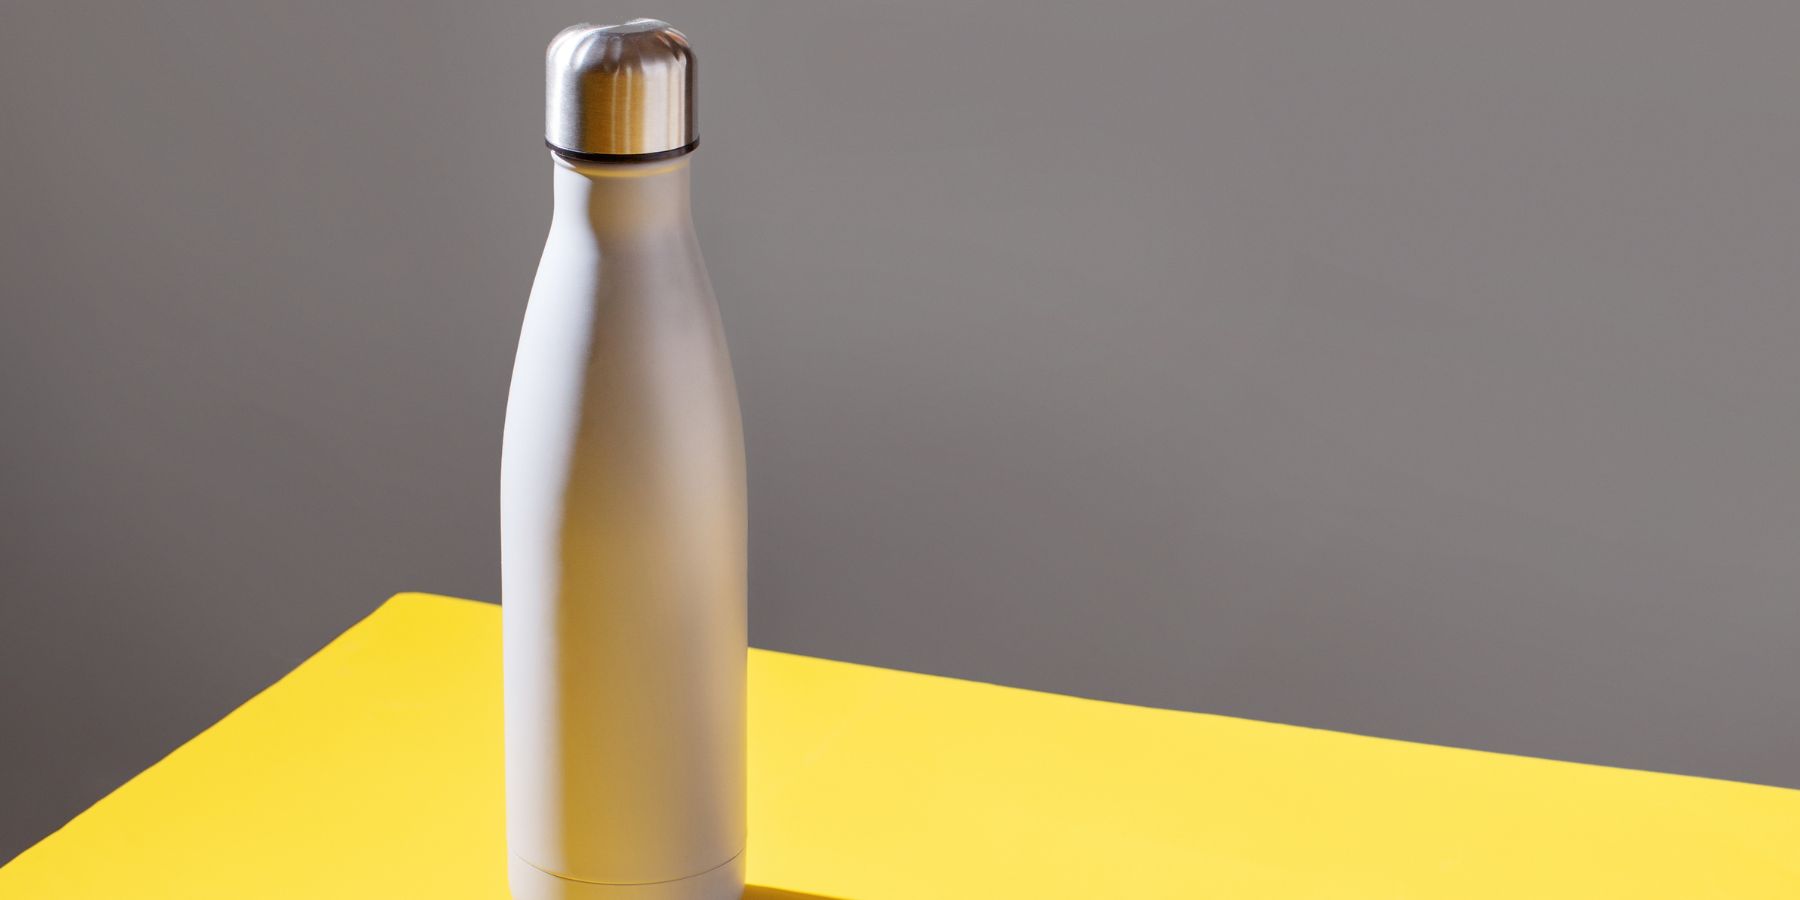 The Ultimate Guide to Choosing a Clean, Reusable Water Bottle